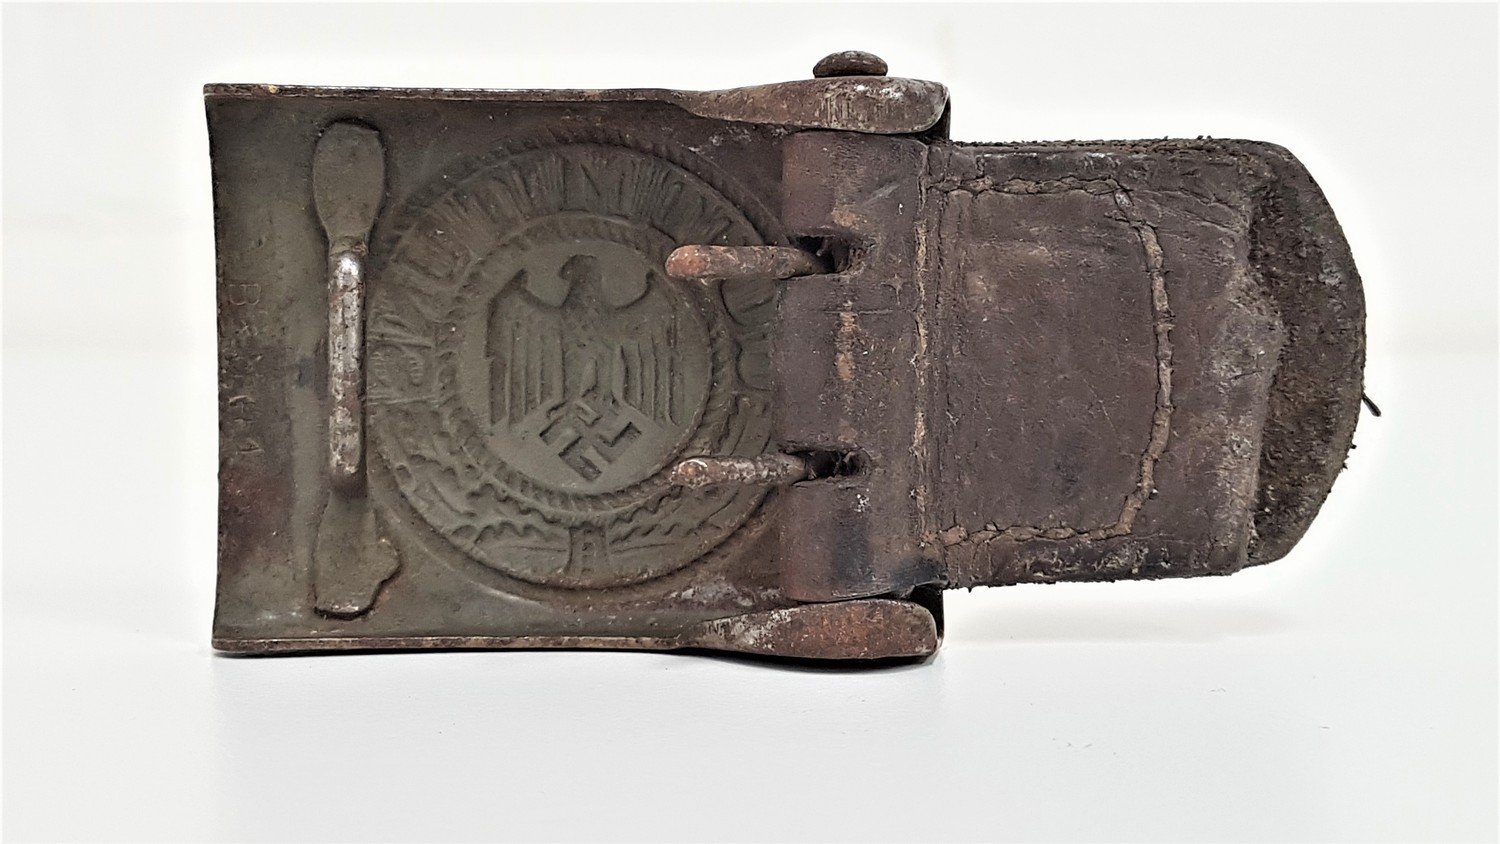 GERMAN WWII BELT BUCKLE marked Gott Mitt Uns around an eagle and swastika, with leather toggle